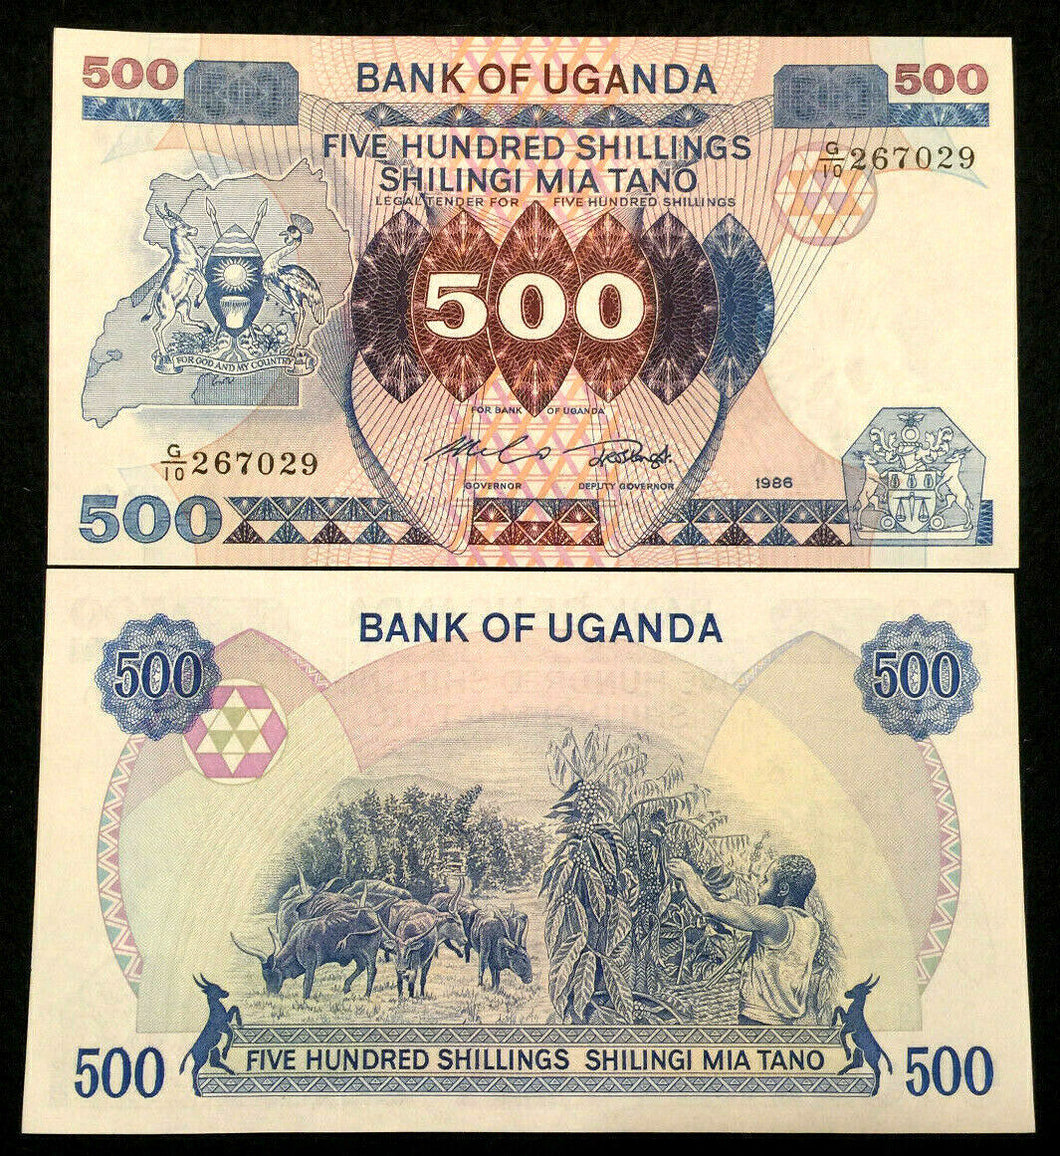 Uganda 500 Shillings 1986 Banknote World Paper Money UNC Currency Bill Note